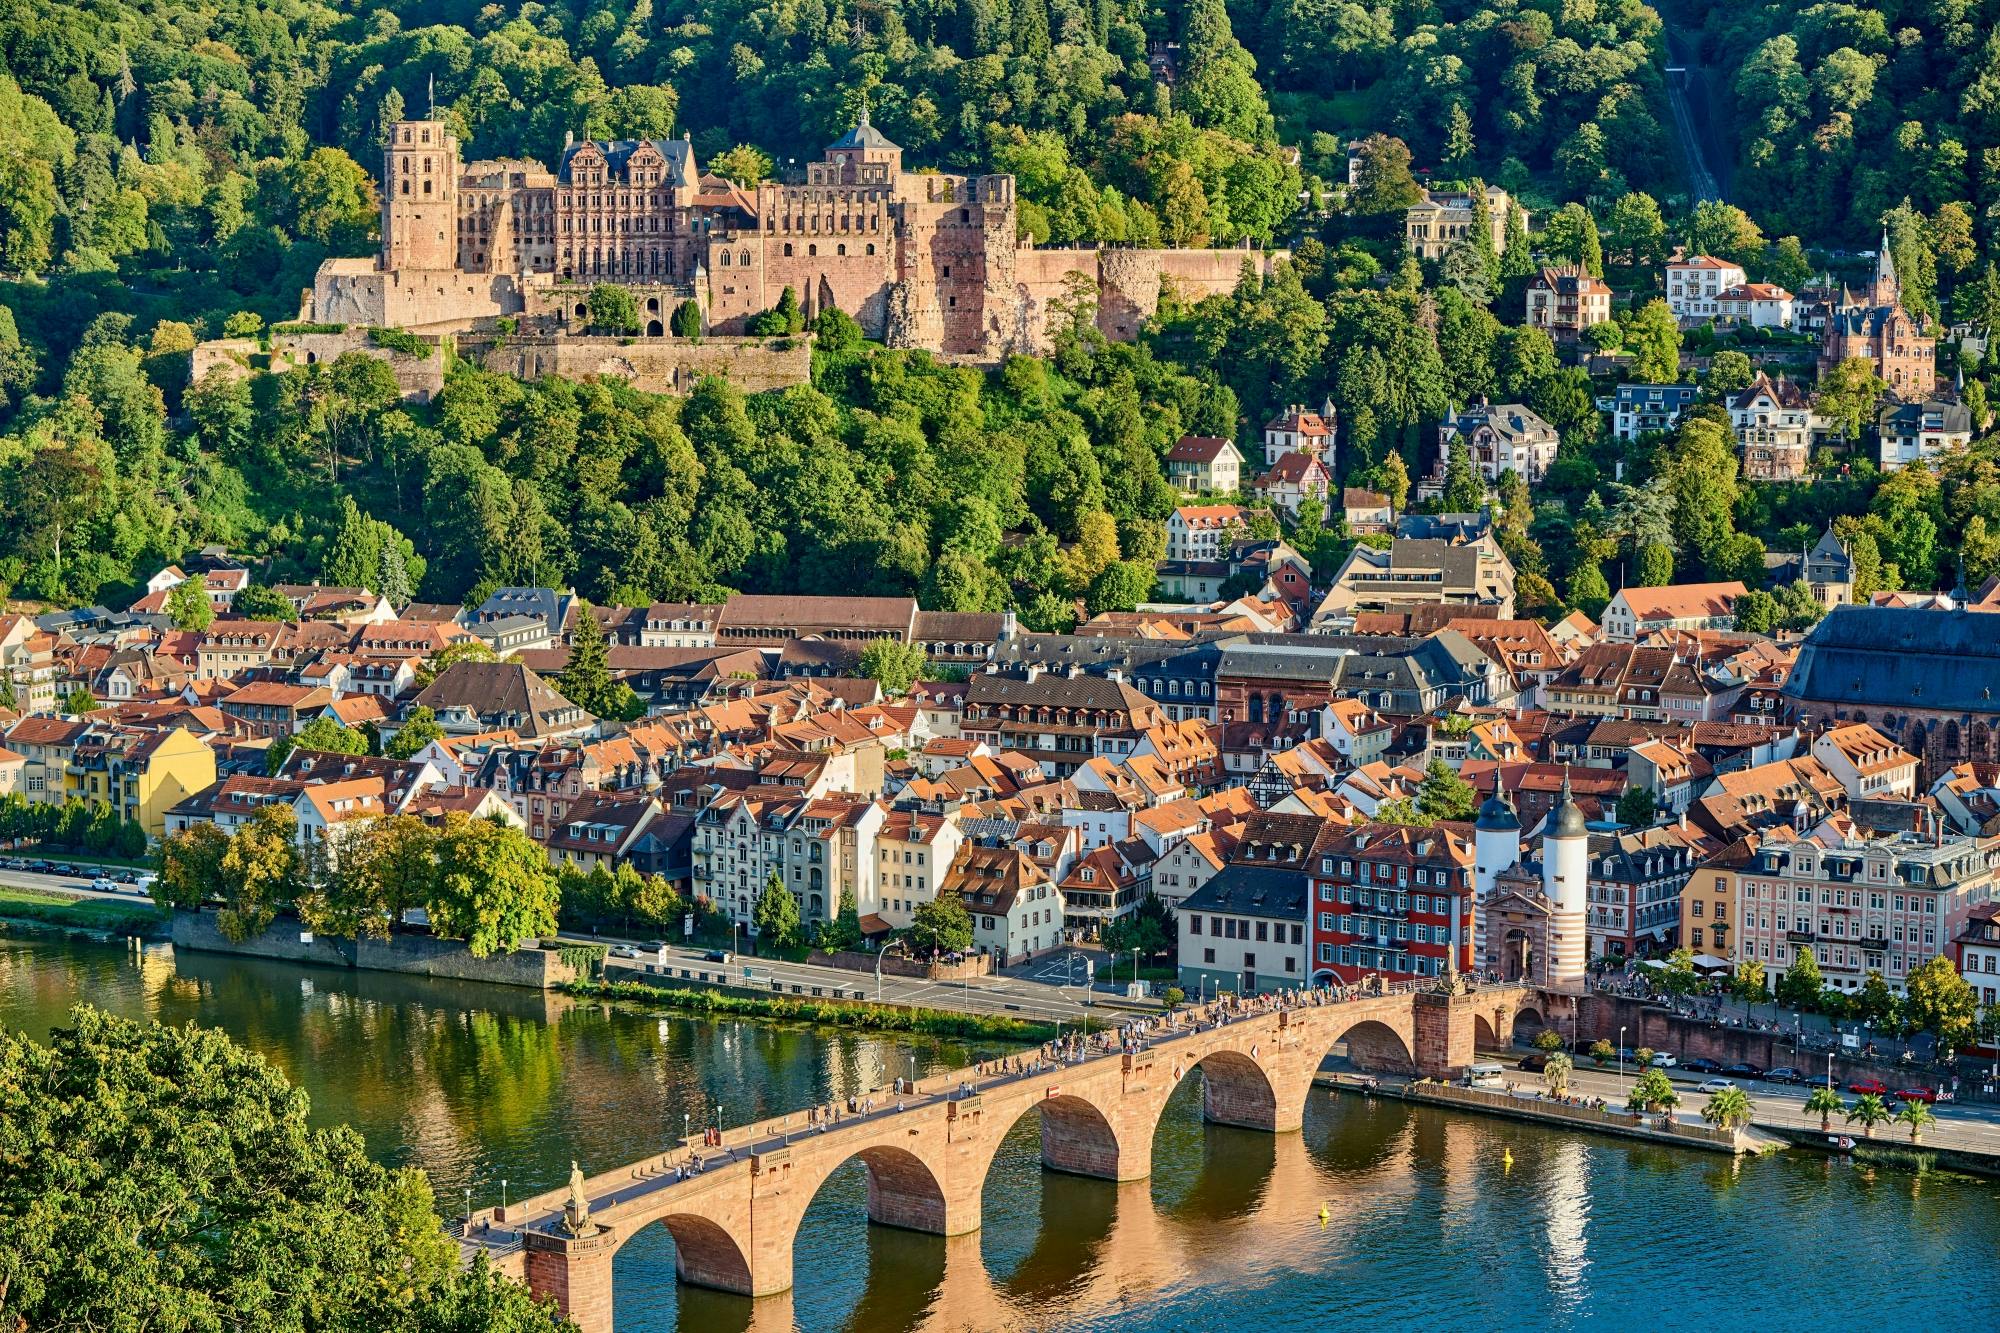 Discover Heidelberg in 1 hour with a local Musement